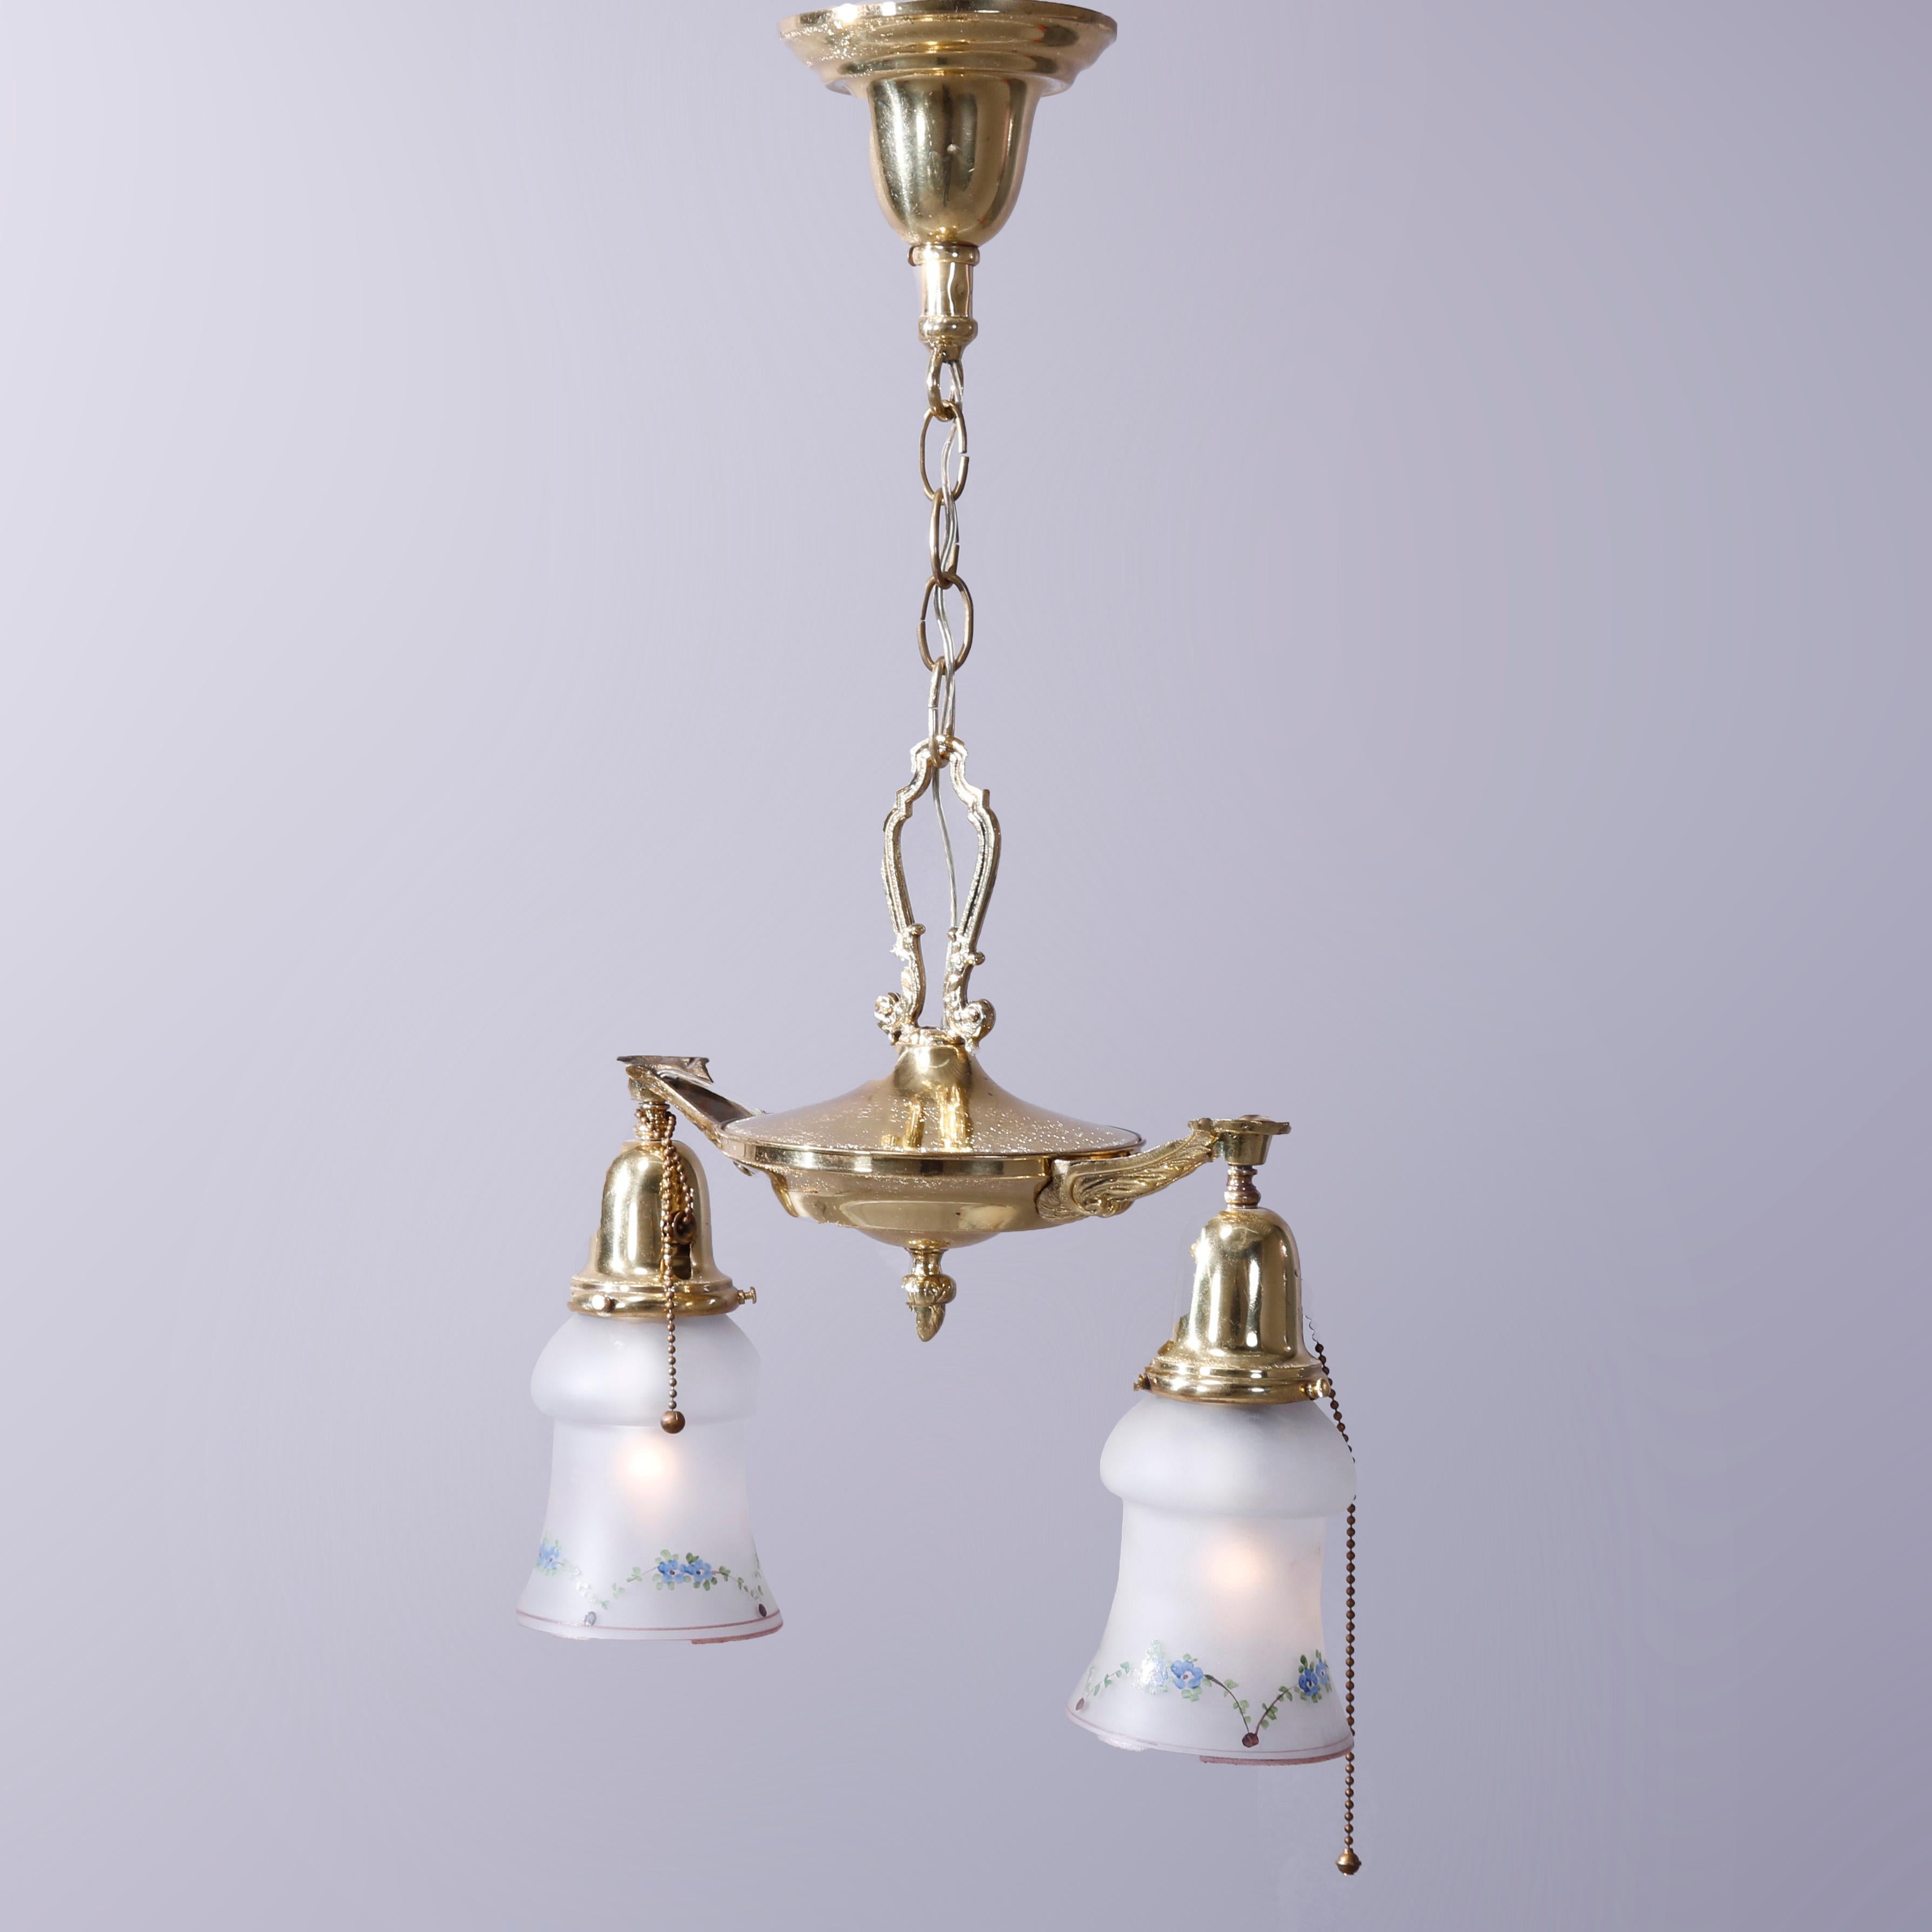 An antique ceiling fixture offers brass frame with two drop-lights terminating in hand painted glass shades, c1920

Measures - 24'' H x 13.5'' W x 6'' D; 29'' overall, 6'' chain.

Catalogue Note: Ask about DISCOUNTED DELIVERY RATES available to most